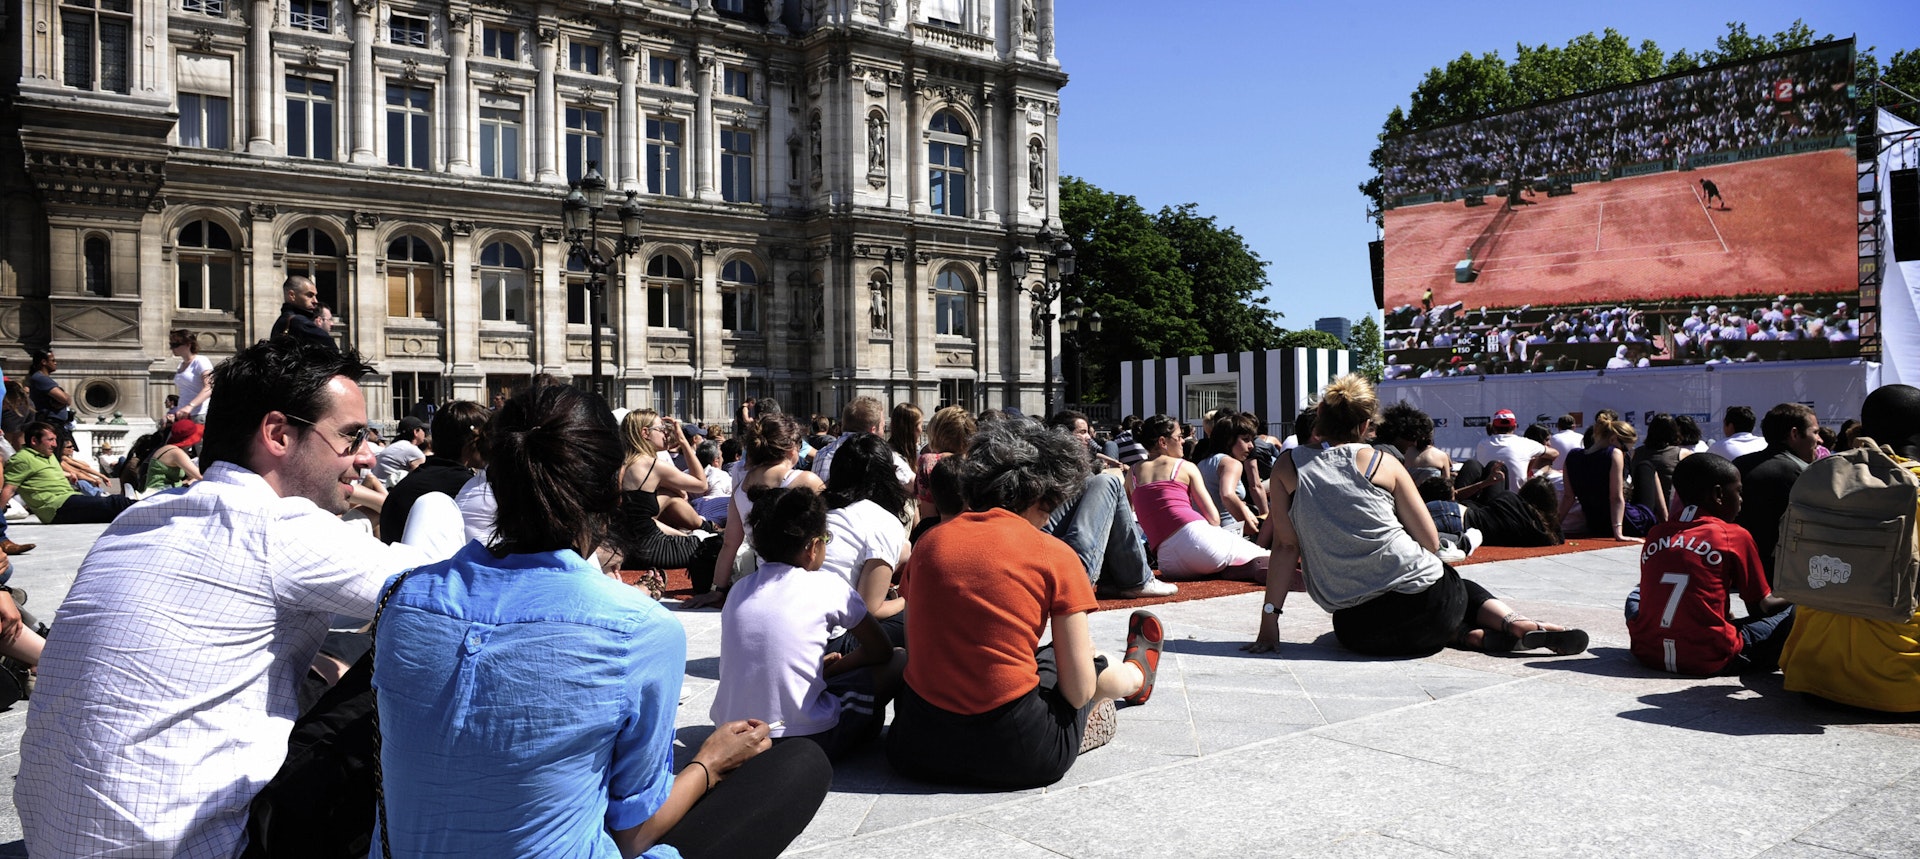 A large crowd sits in the sun next to the beautifully-ornate facade of the city hall while watching the French Open tennis on a huge screen